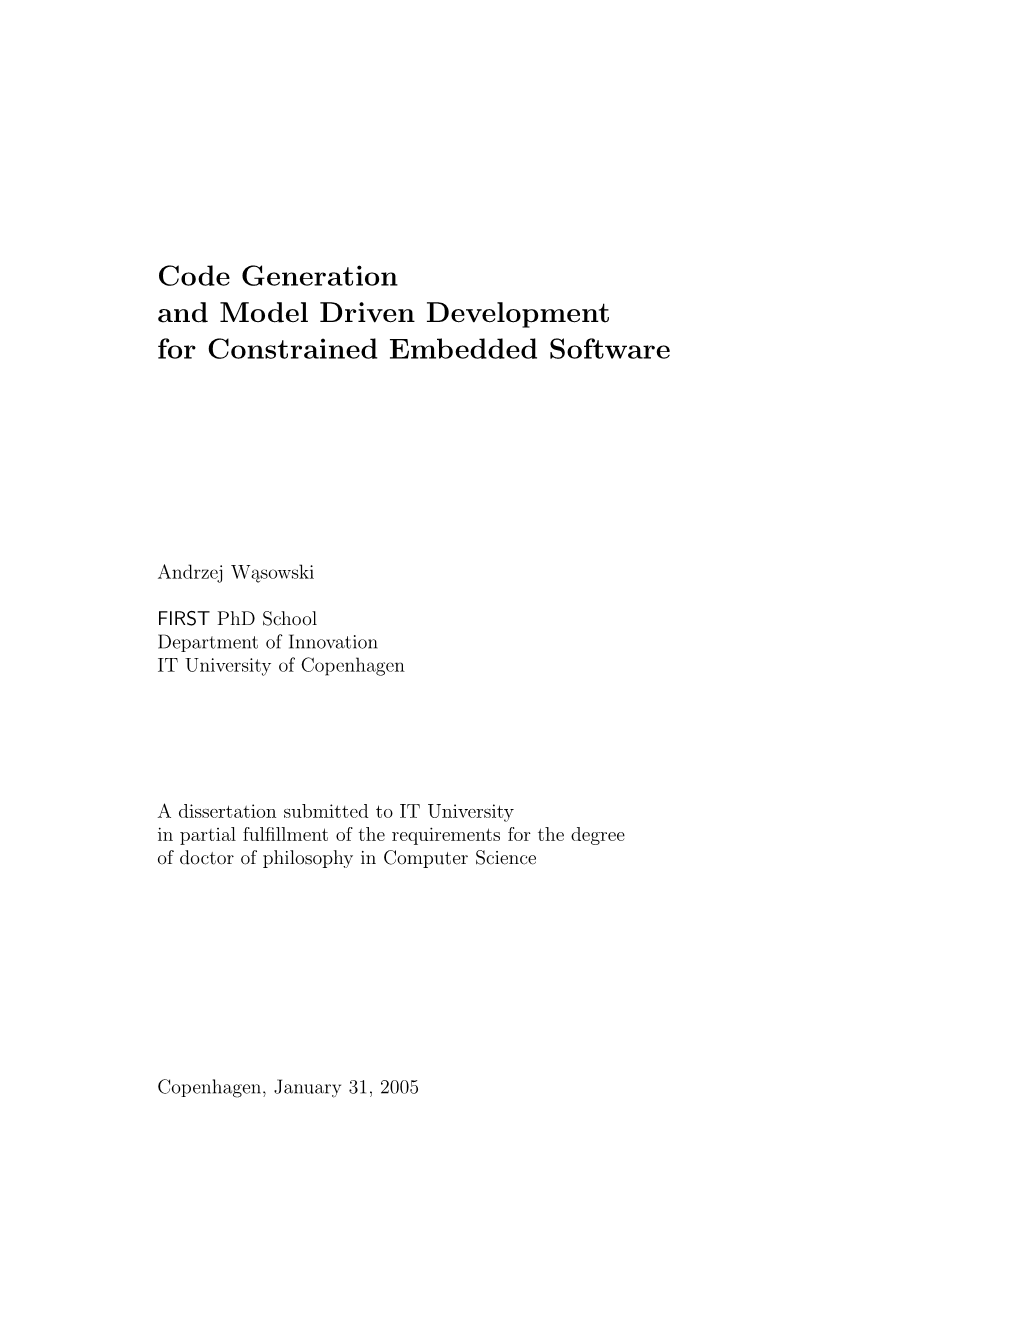 Code Generation and Model Driven Development for Constrained Embedded Software